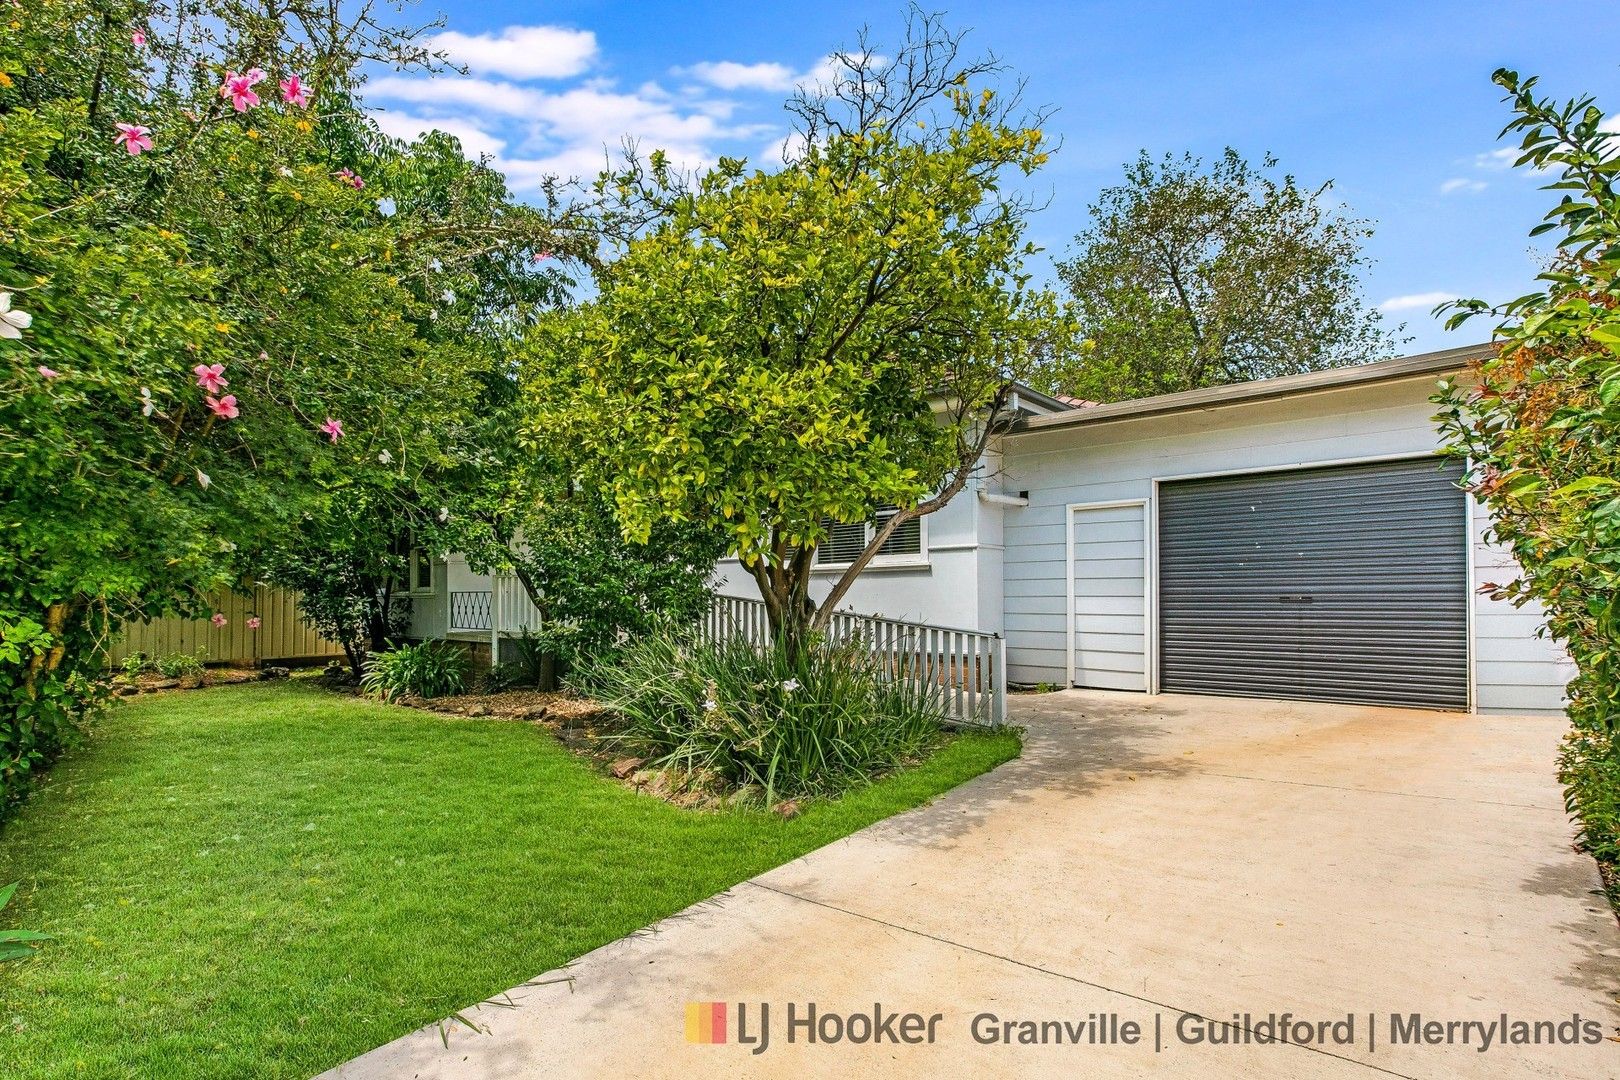 81 Queen Street, Guildford West NSW 2161